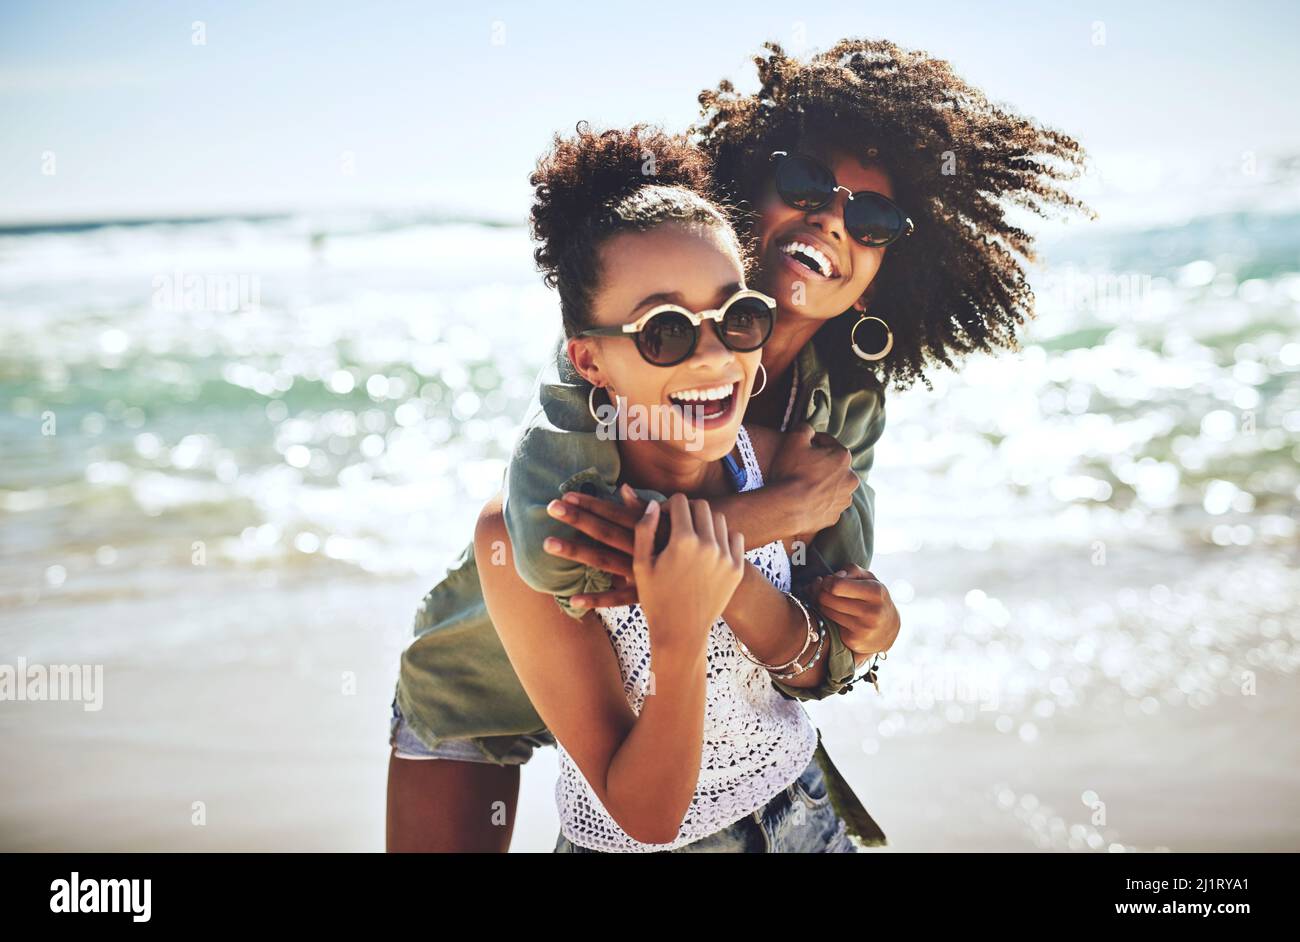 We missed the beach. Shot of two girlfriends enjoying themselves at the beach. Stock Photo